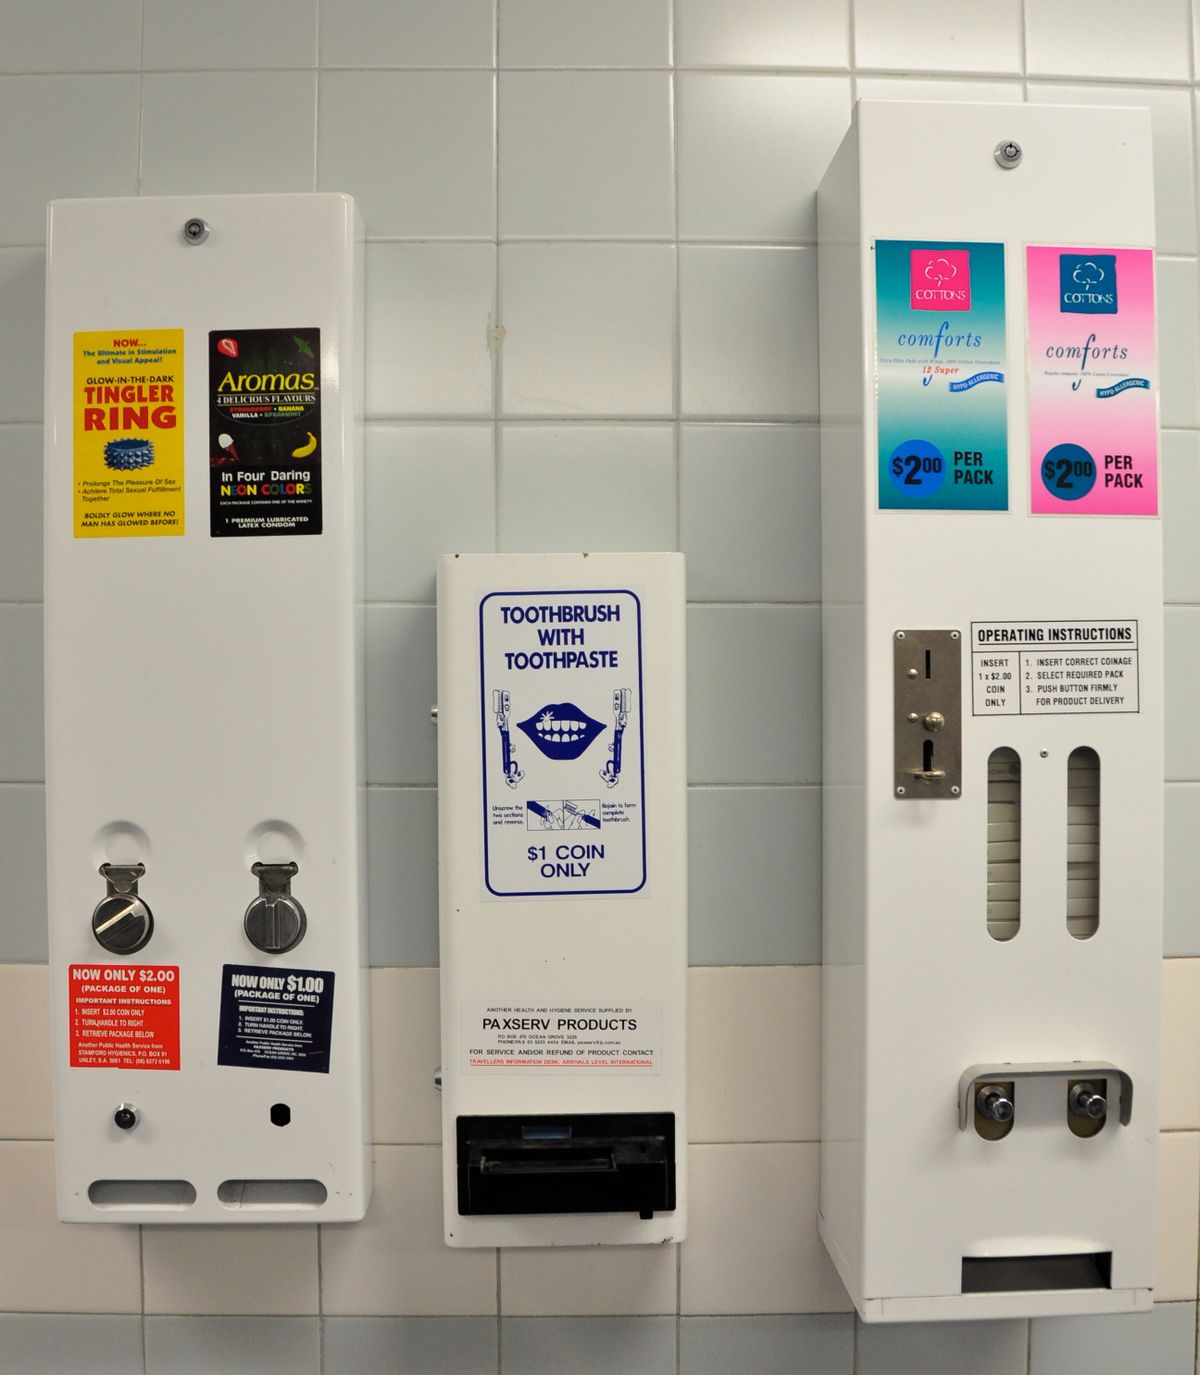 Across the United Kingdom, STI-detecting microchips will soon be sold in vending machines like these.